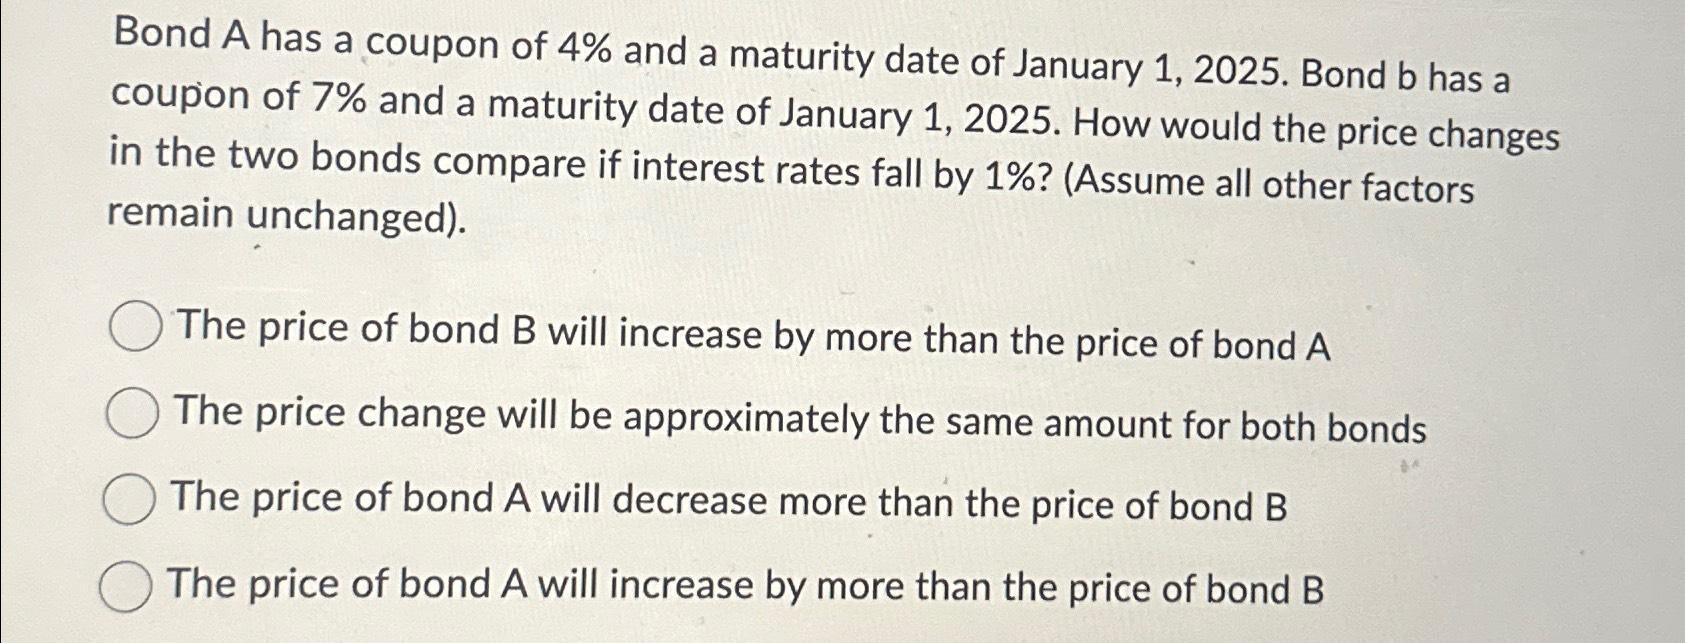 Bond A has a coupon of 4% and a maturity date of January 1, 2025. Bond b has a coupon of 7% and a maturity